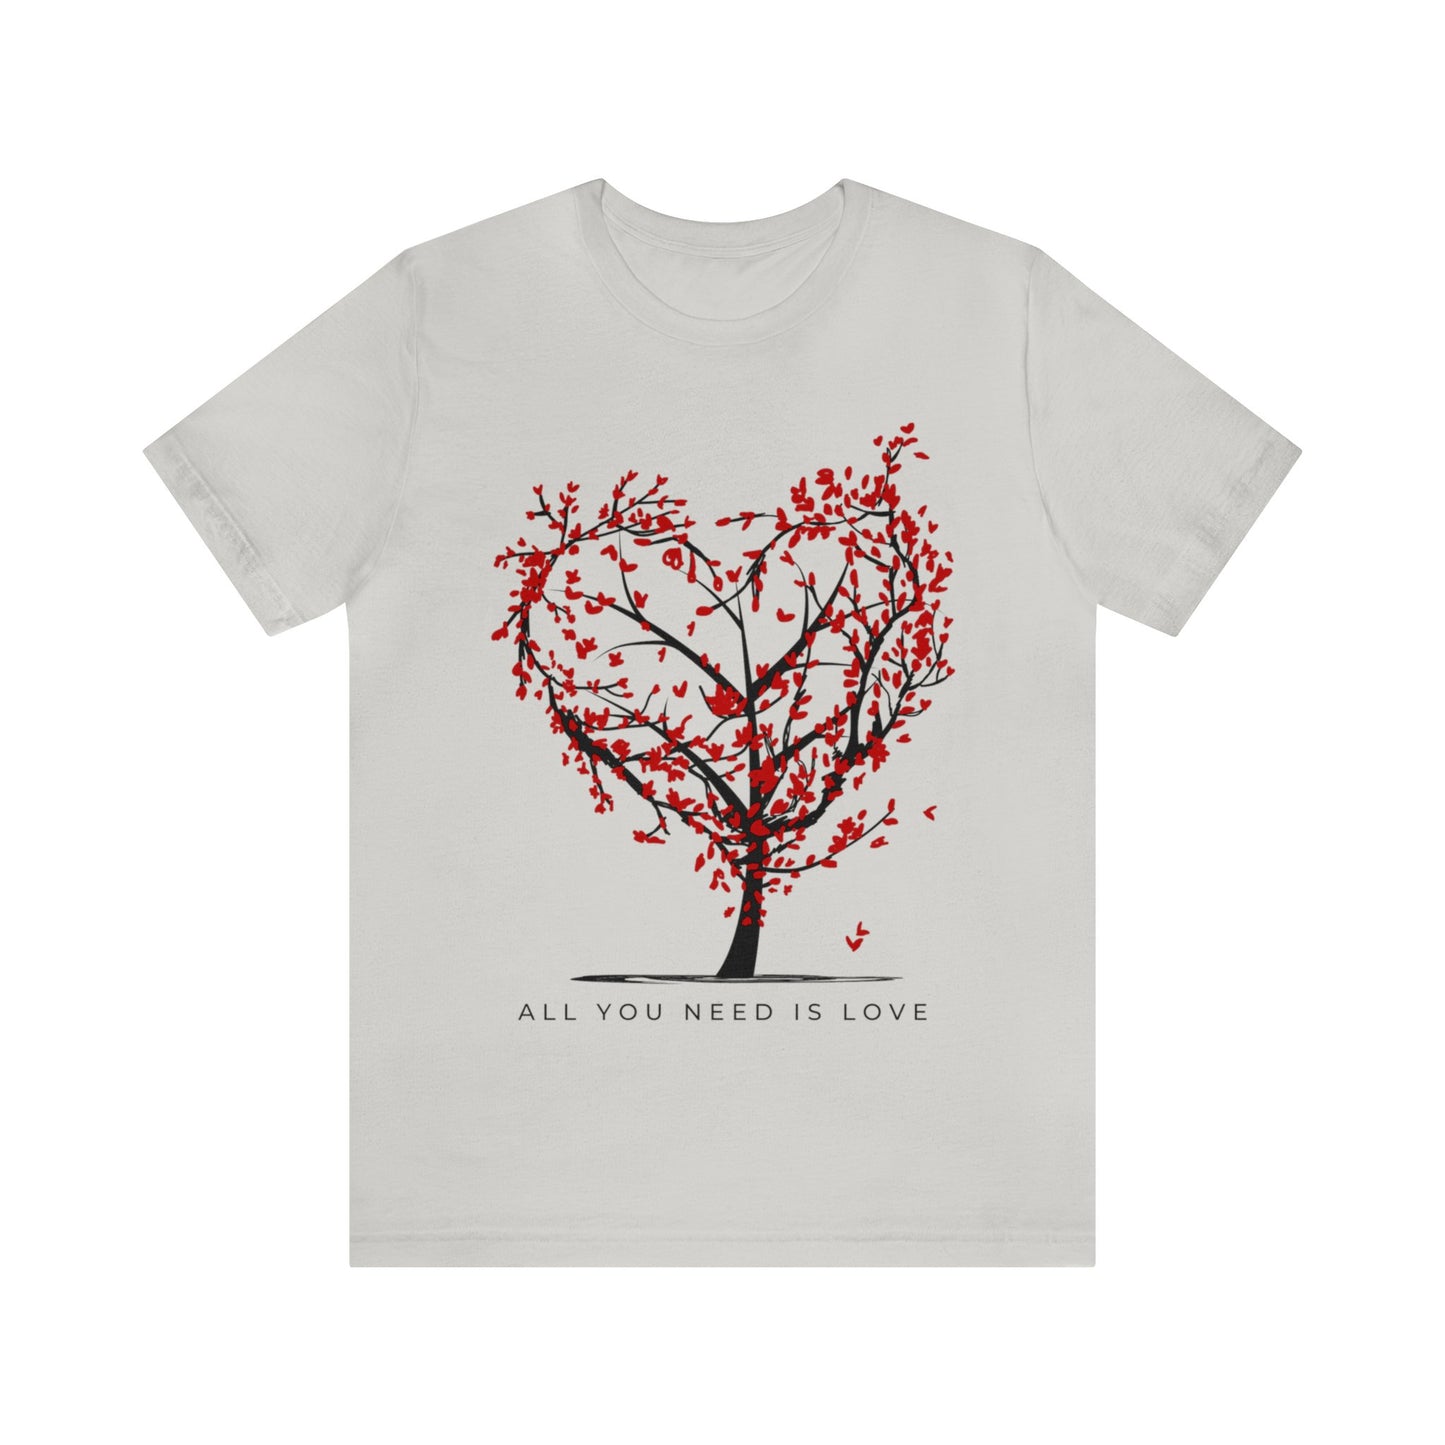 All You Need Is Love - Motivational, Inspirational T shirt for Men and Women